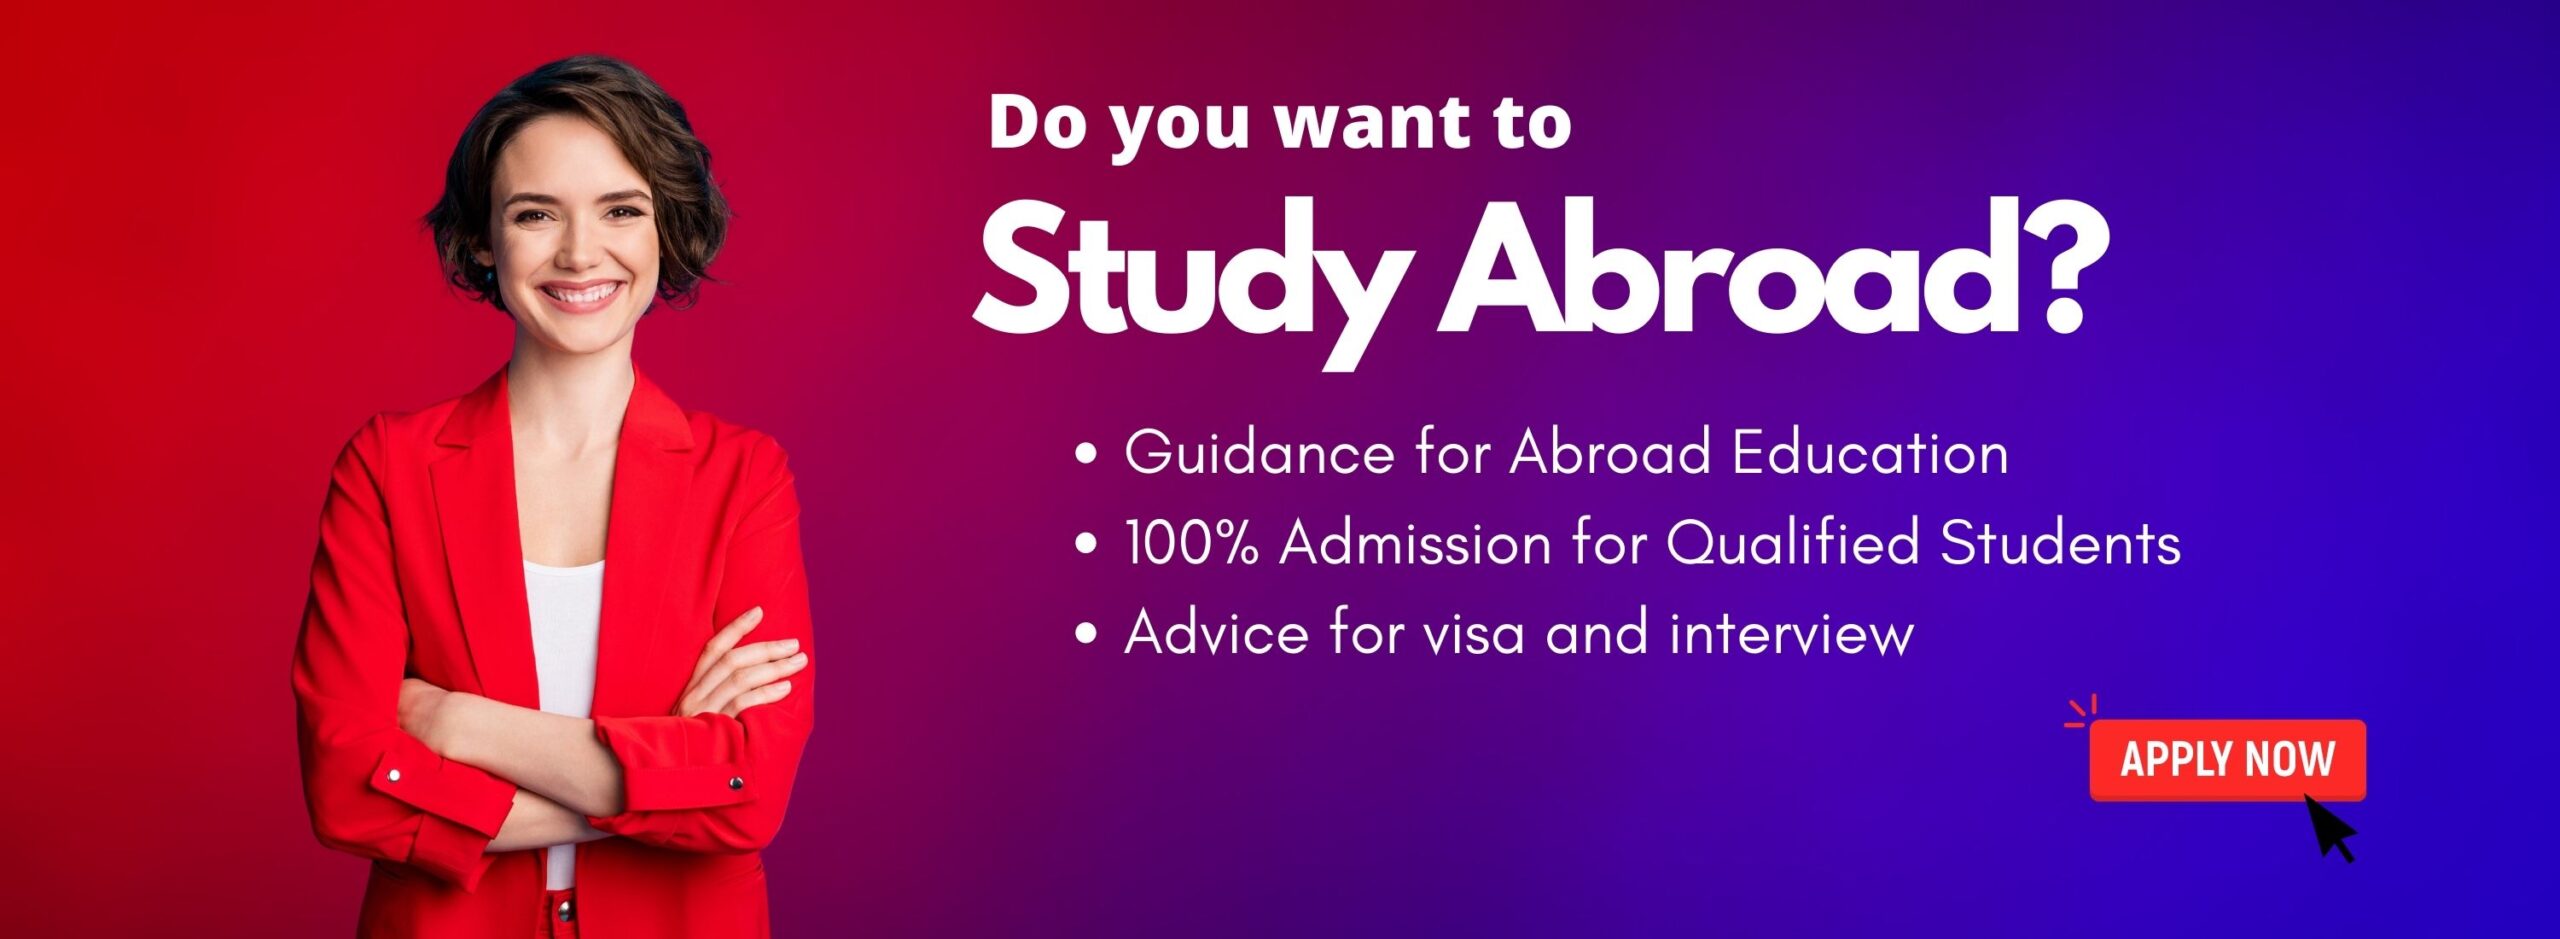 Study Abroad - KCR CONSULTANTS